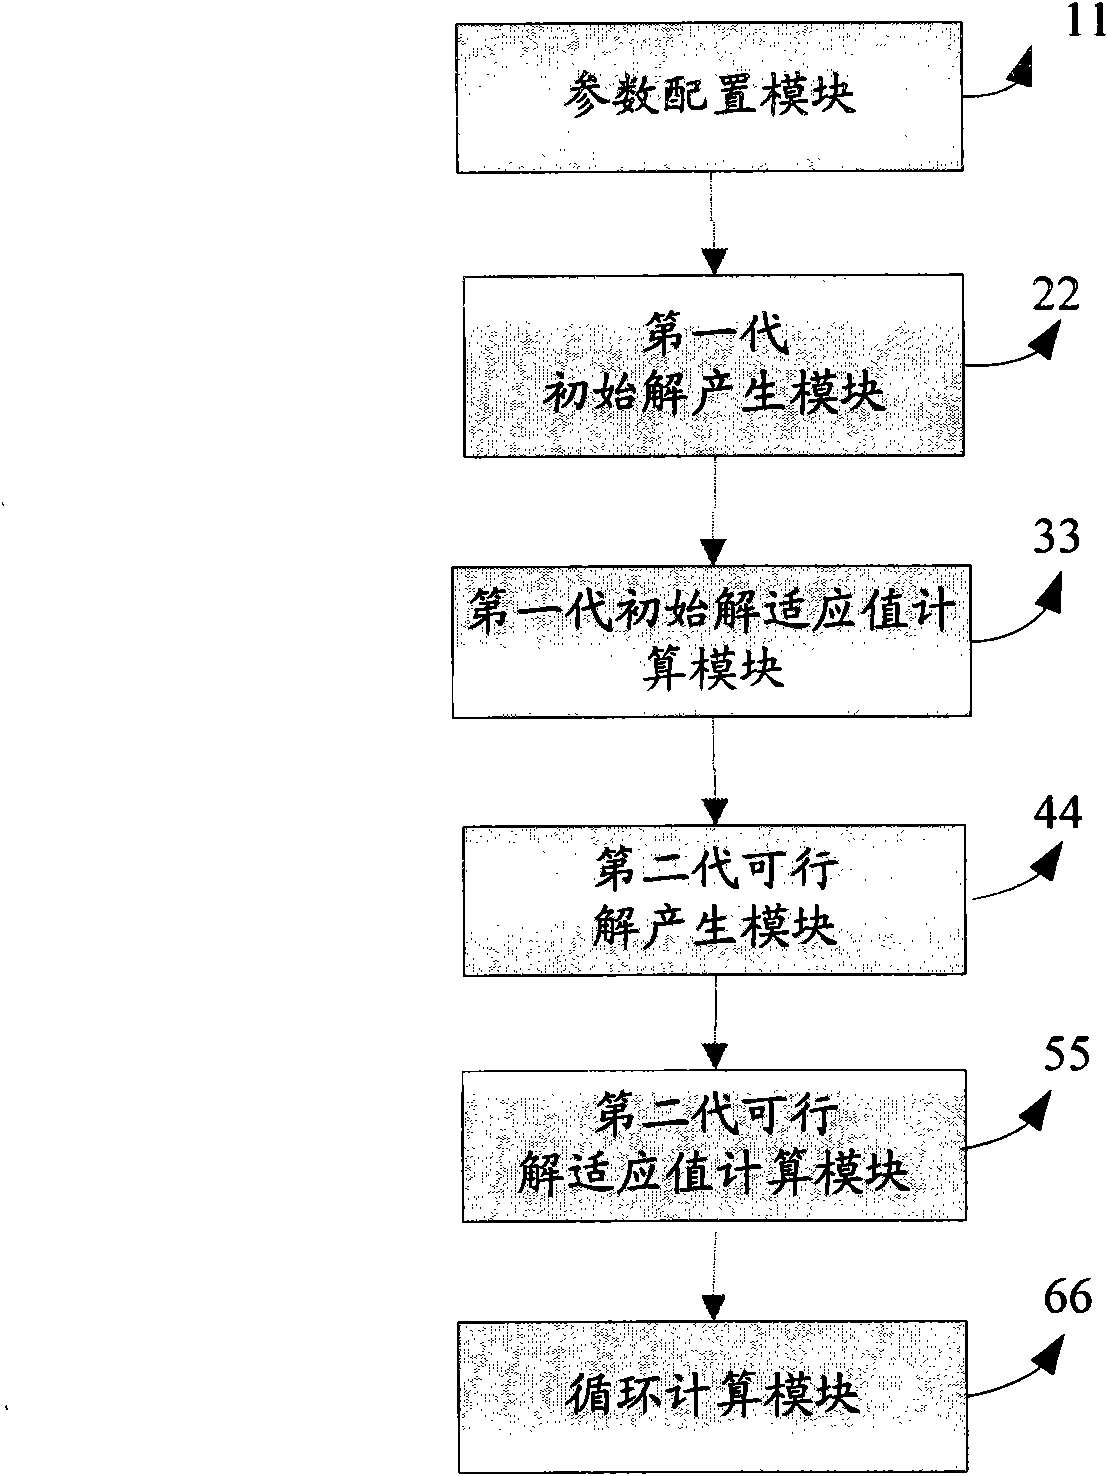 Method and device for optimizing goods loading of container